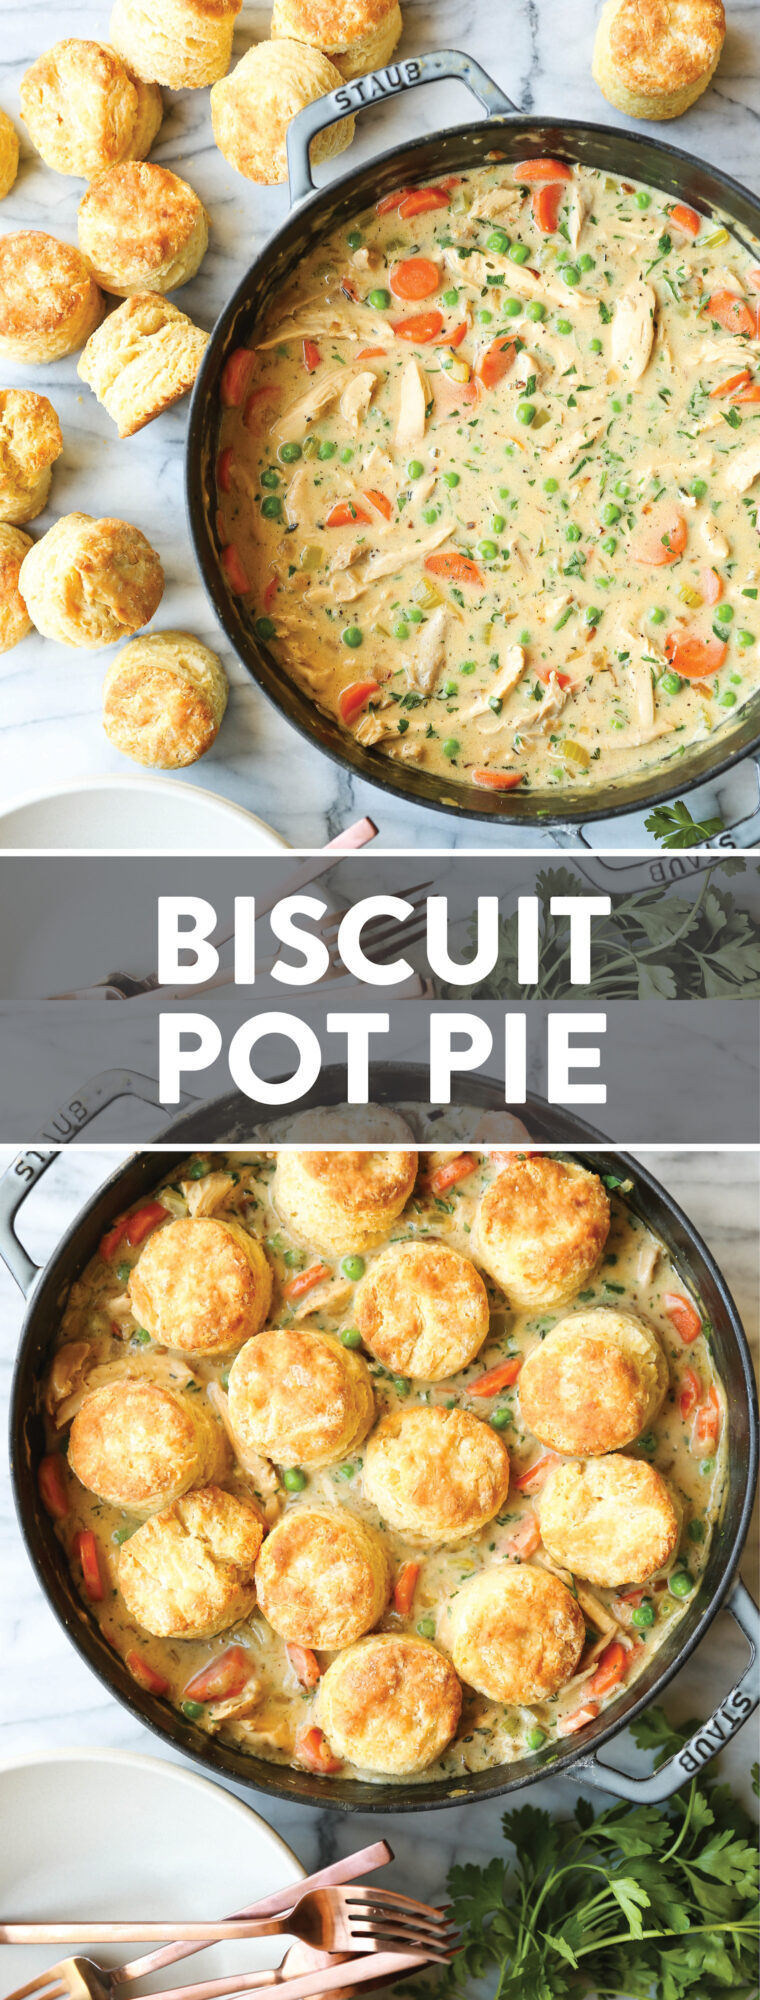 Biscuit Pot Pie - The ultimate comfort food! Topped with the flakiest, mile-high biscuits ever (made ahead of time). So cozy + so darn good!